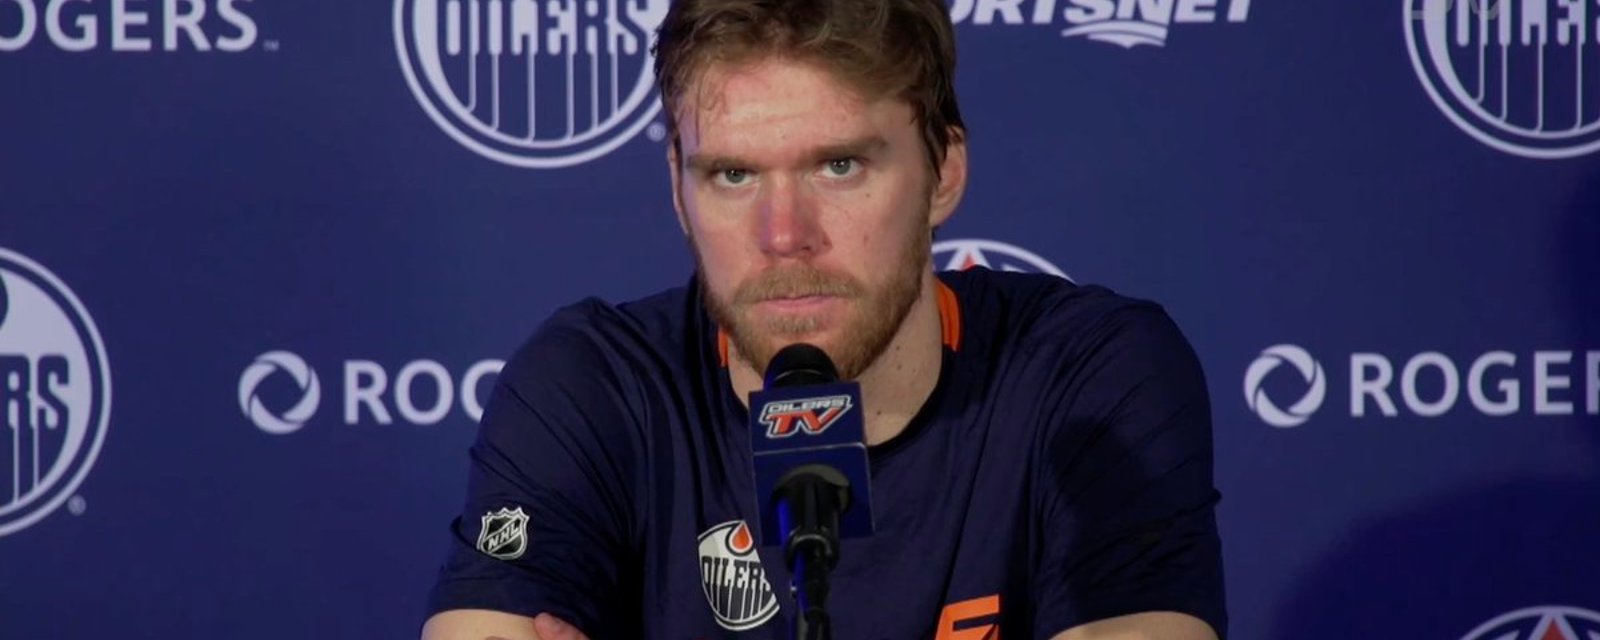 Connor McDavid calls for the NHL to make significant game change